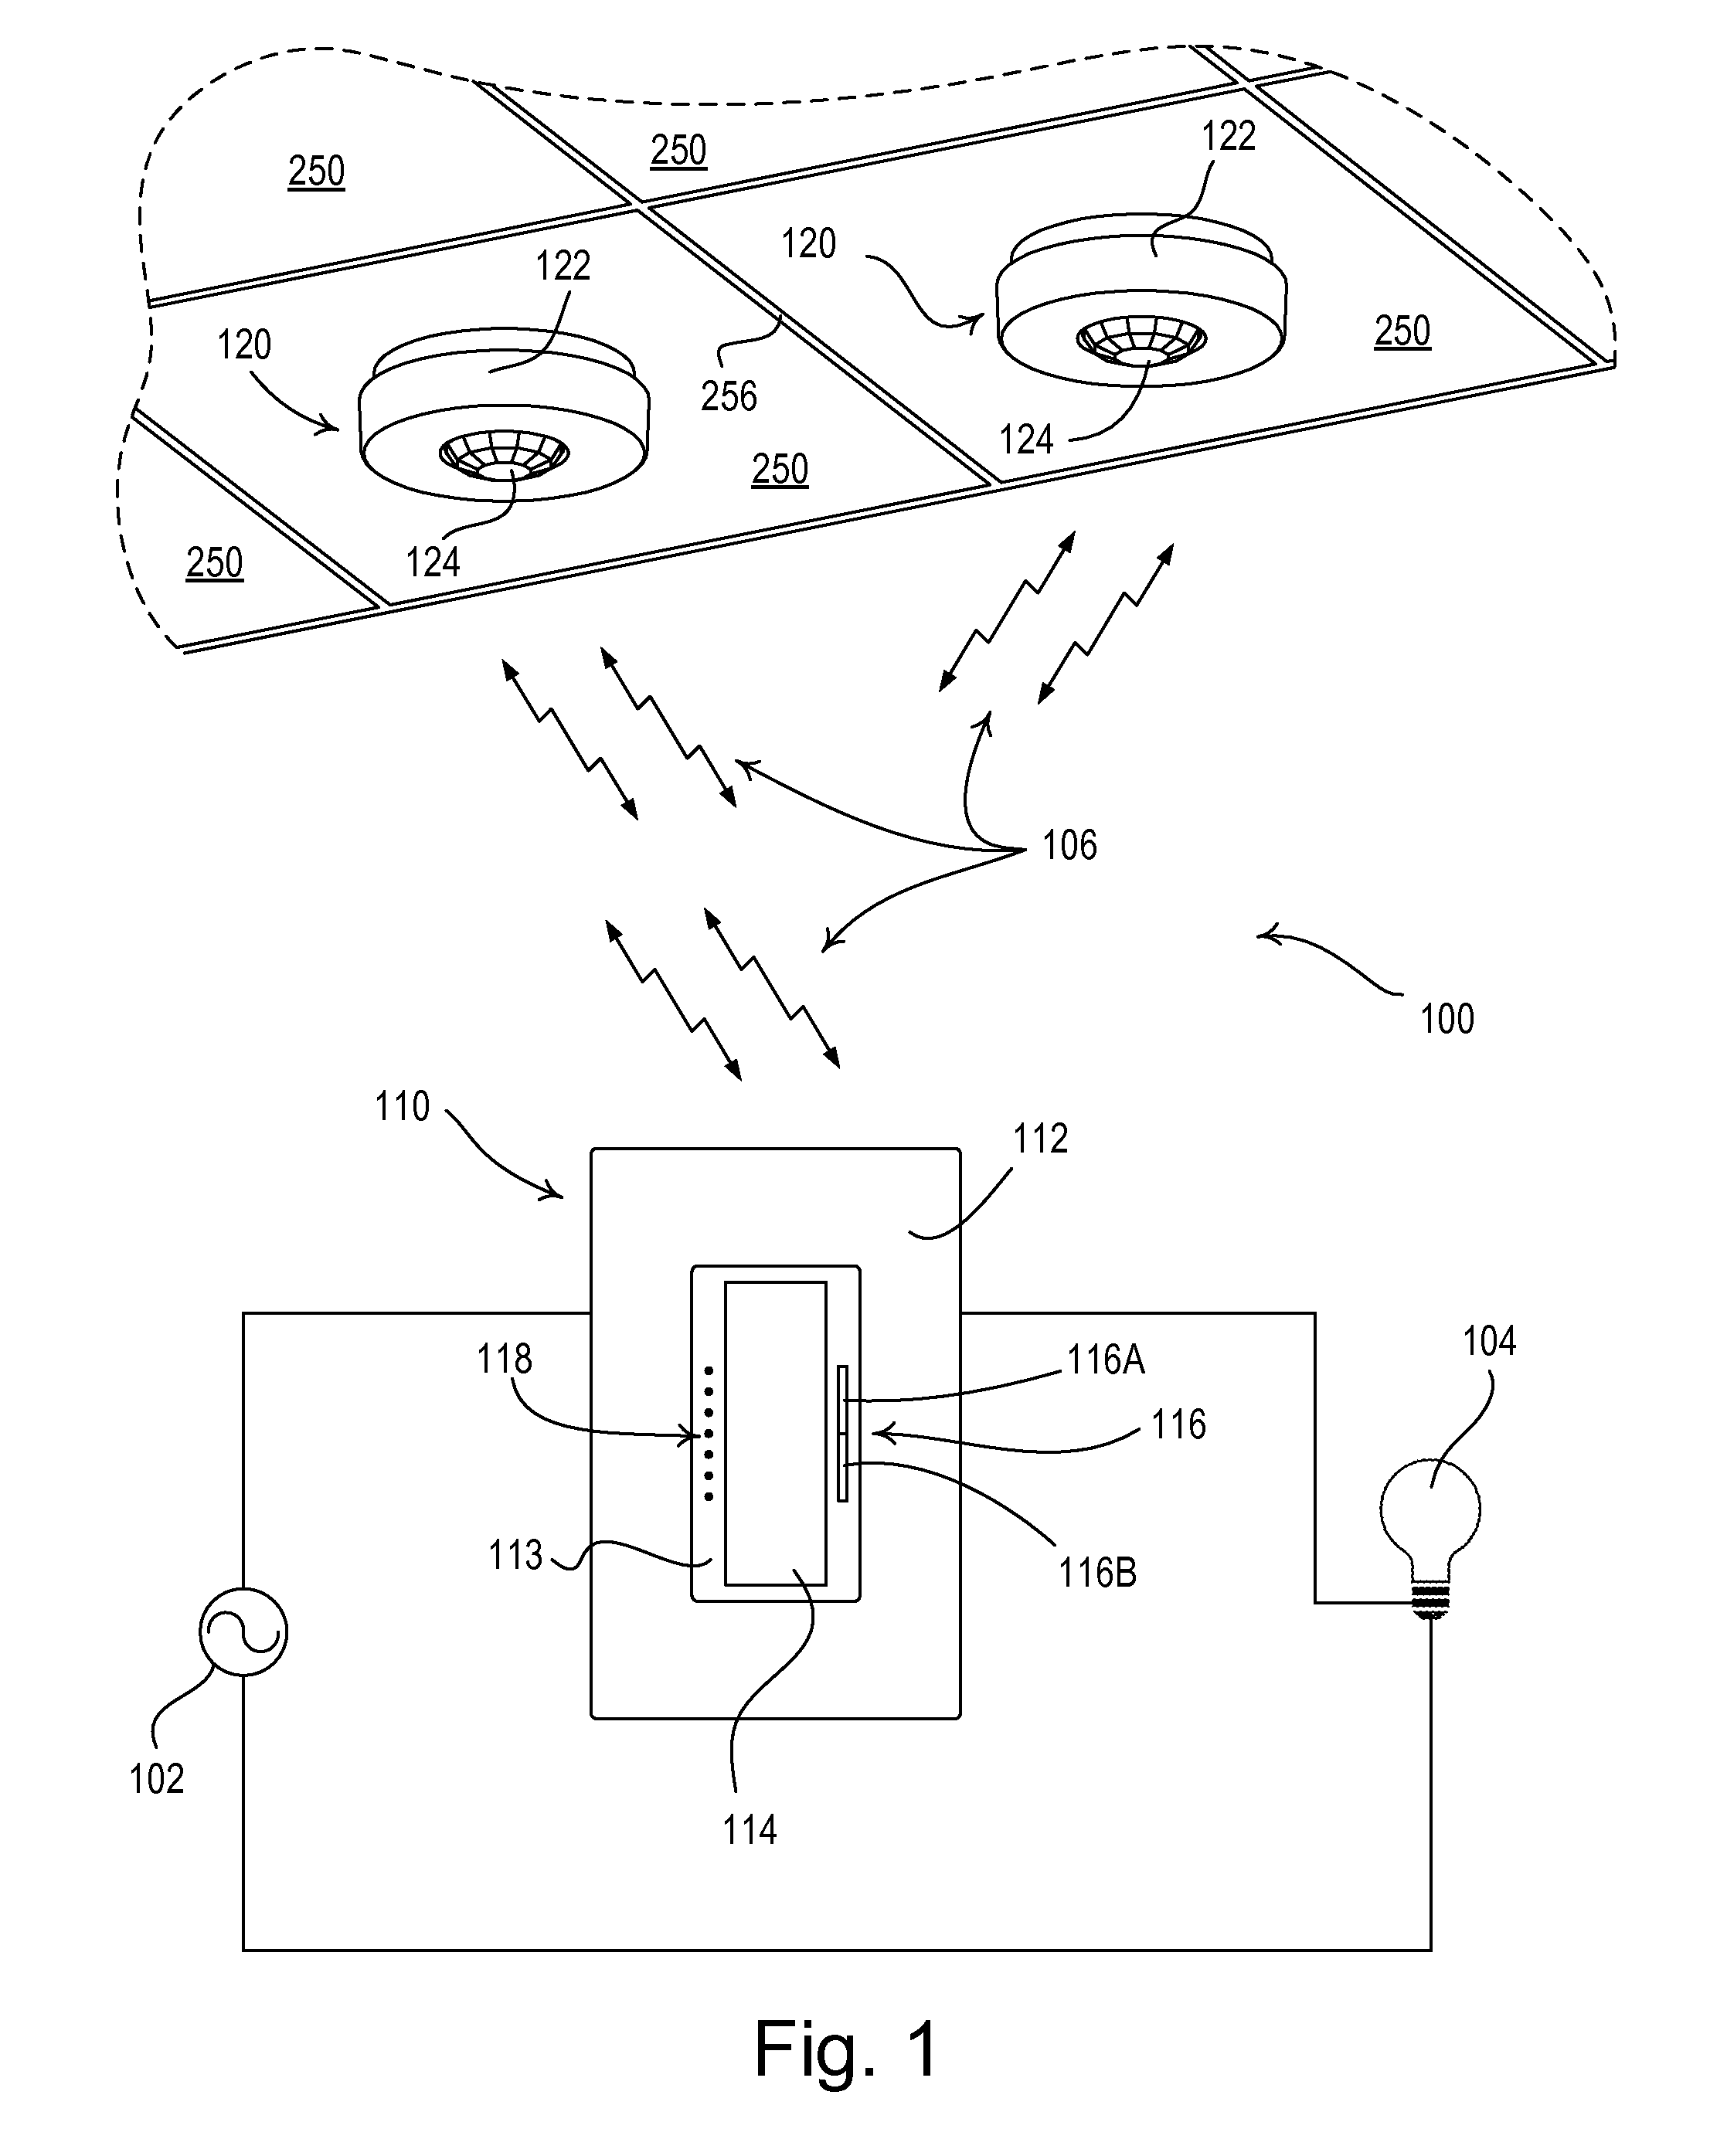 Method and apparatus for configuring a wireless sensor